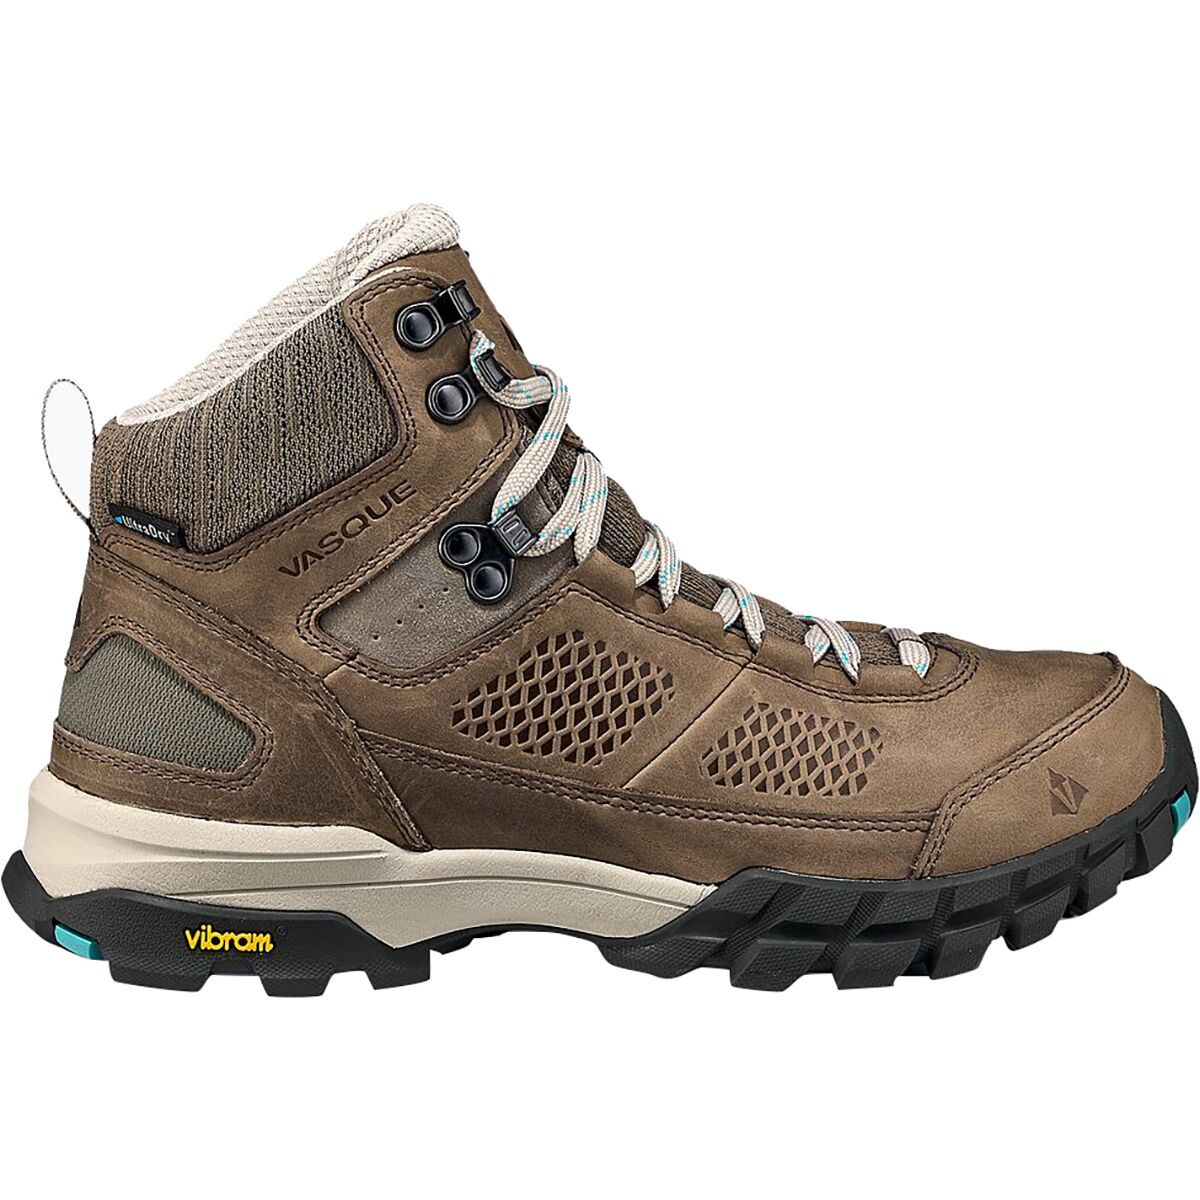 Vasque Talus AT UltraDry Wide Hiking Boot - Women's